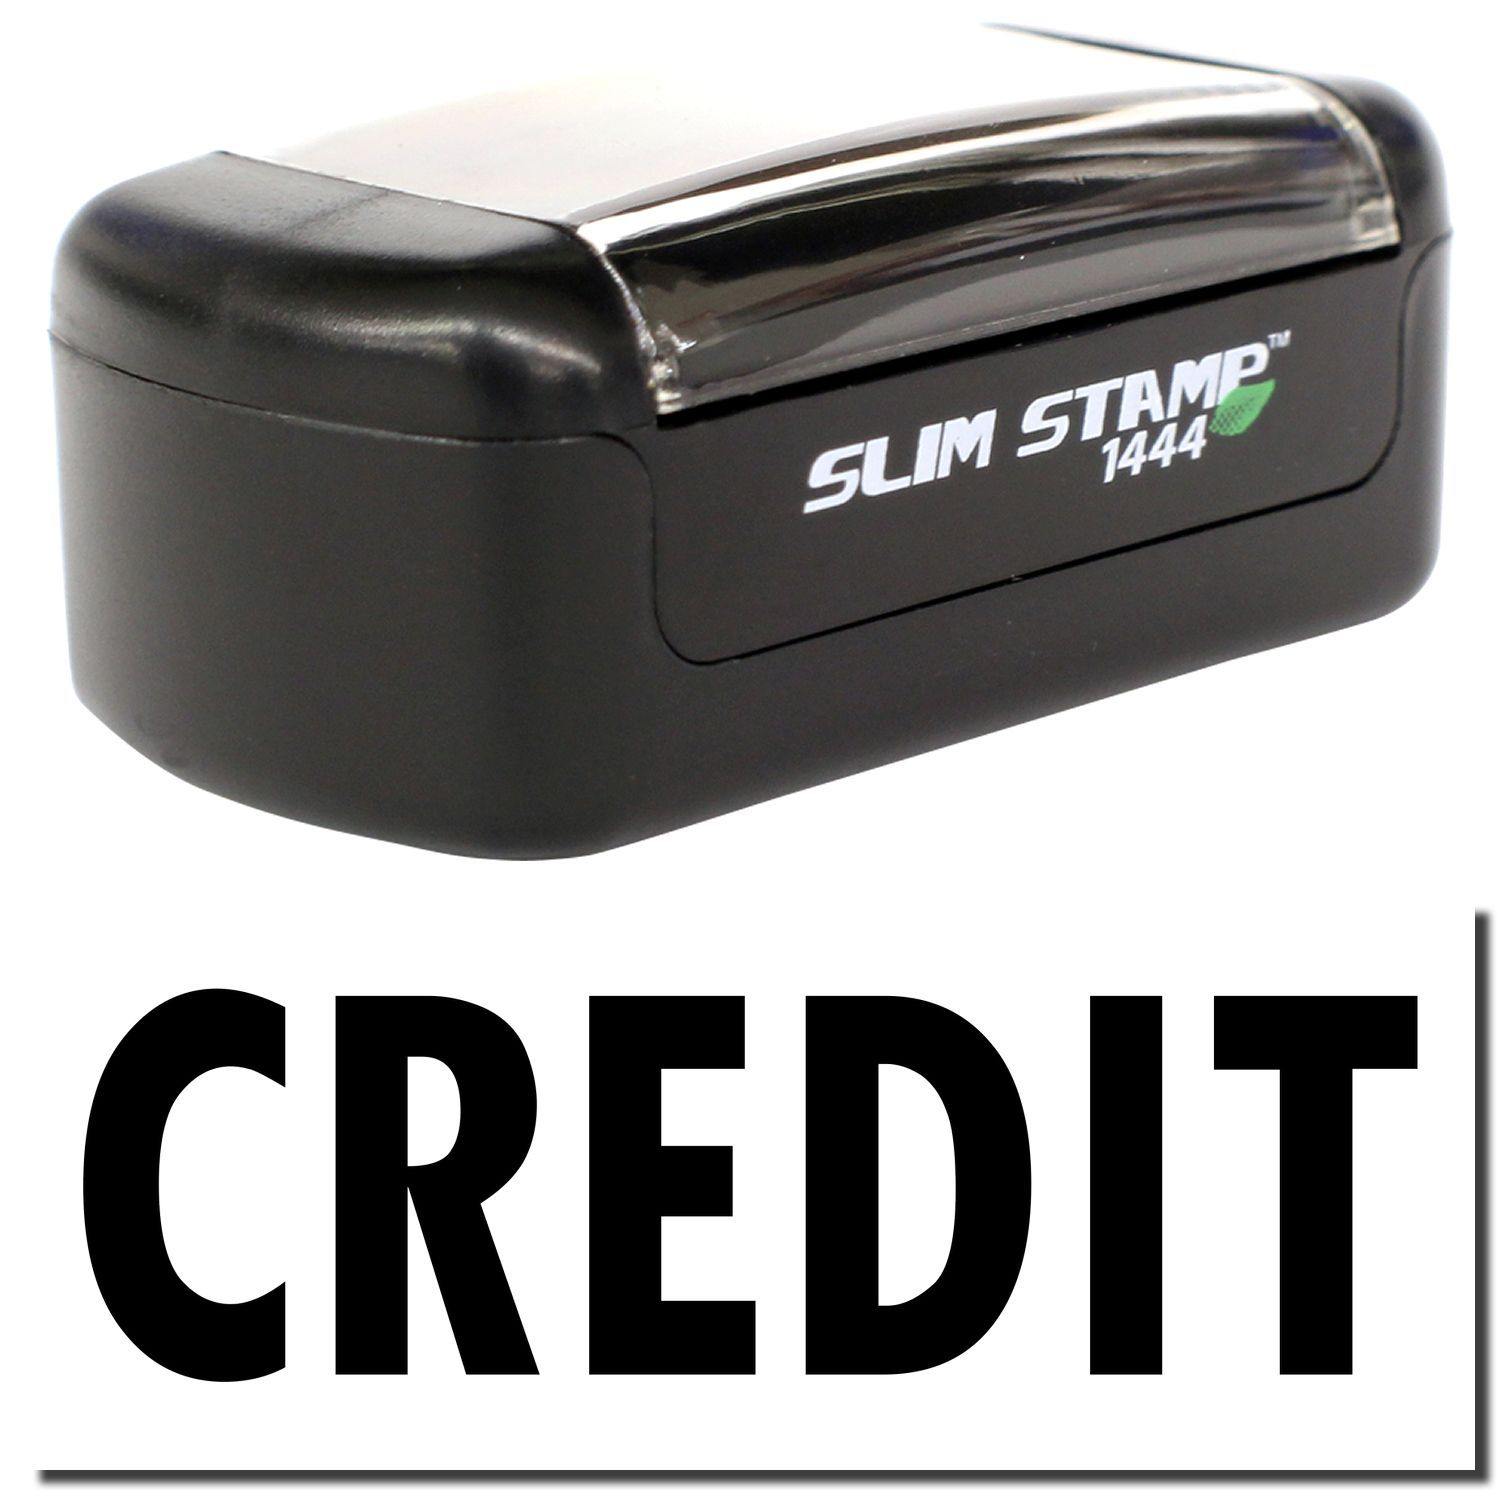 A stock office pre-inked stamp with a stamped image showing how the text "CREDIT" is displayed after stamping.